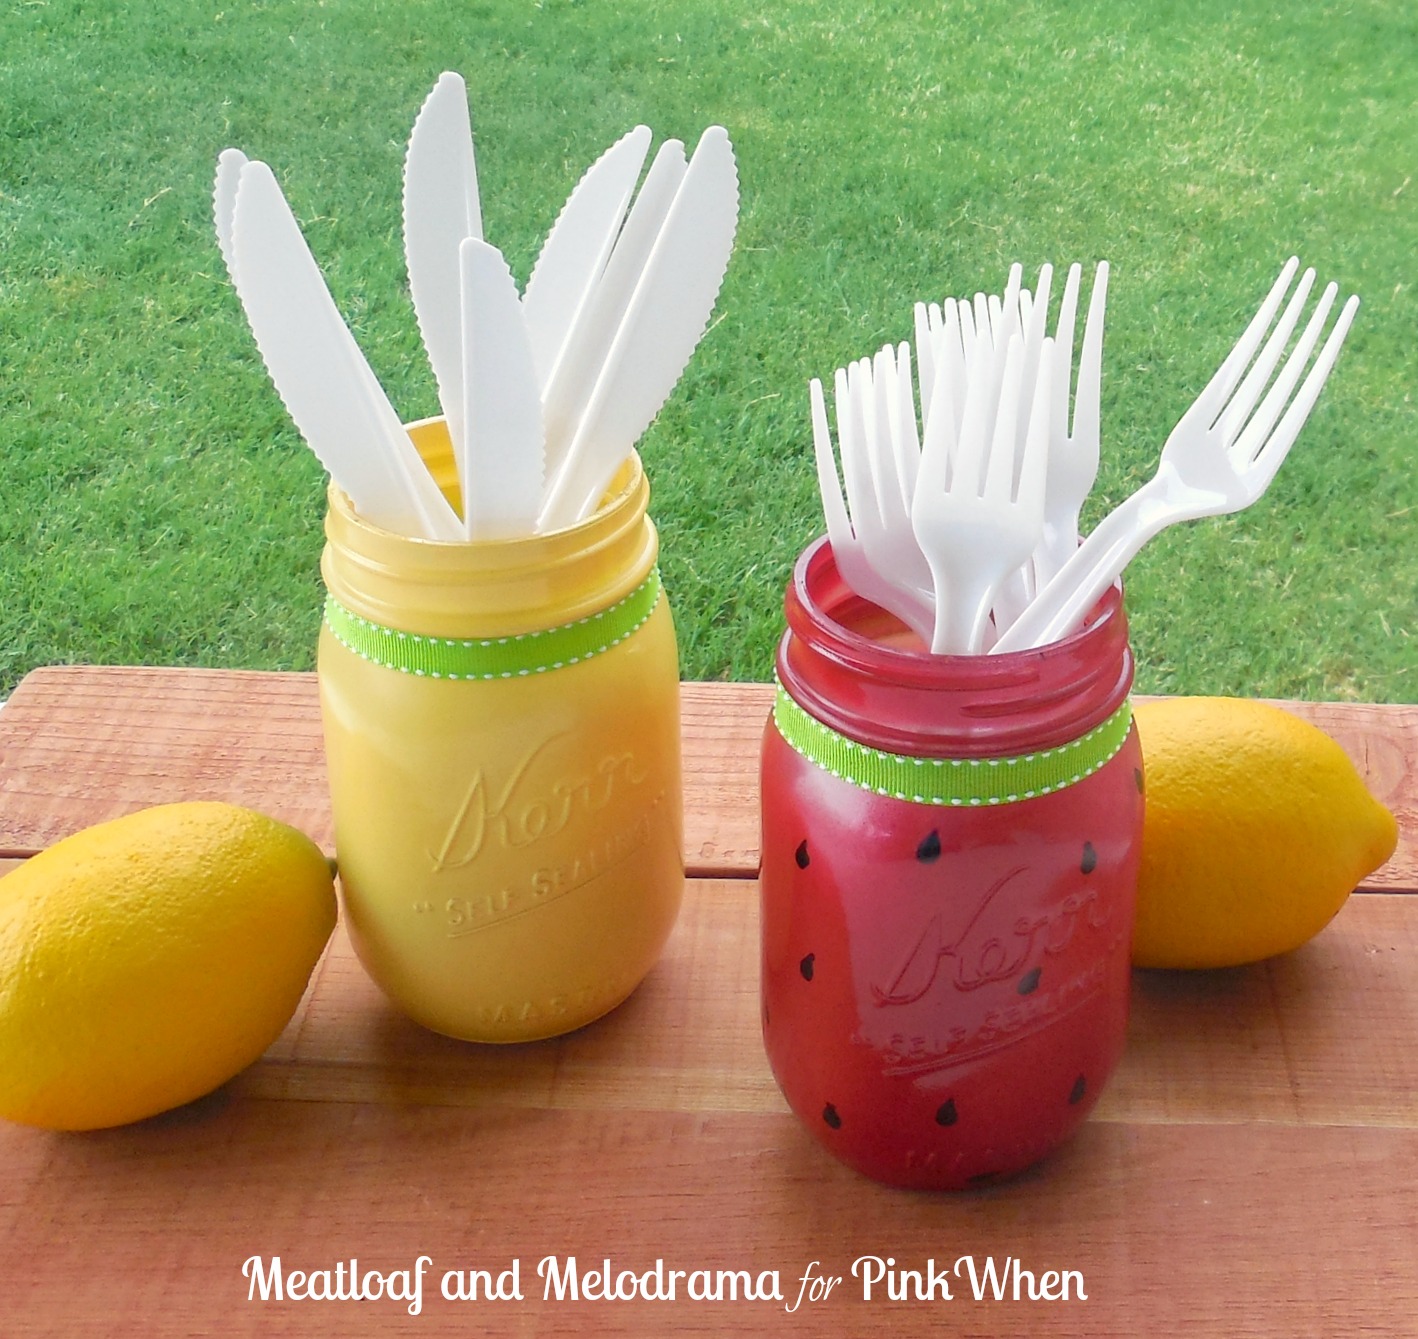 Backyard cookout decor featuring mason jars and forks.